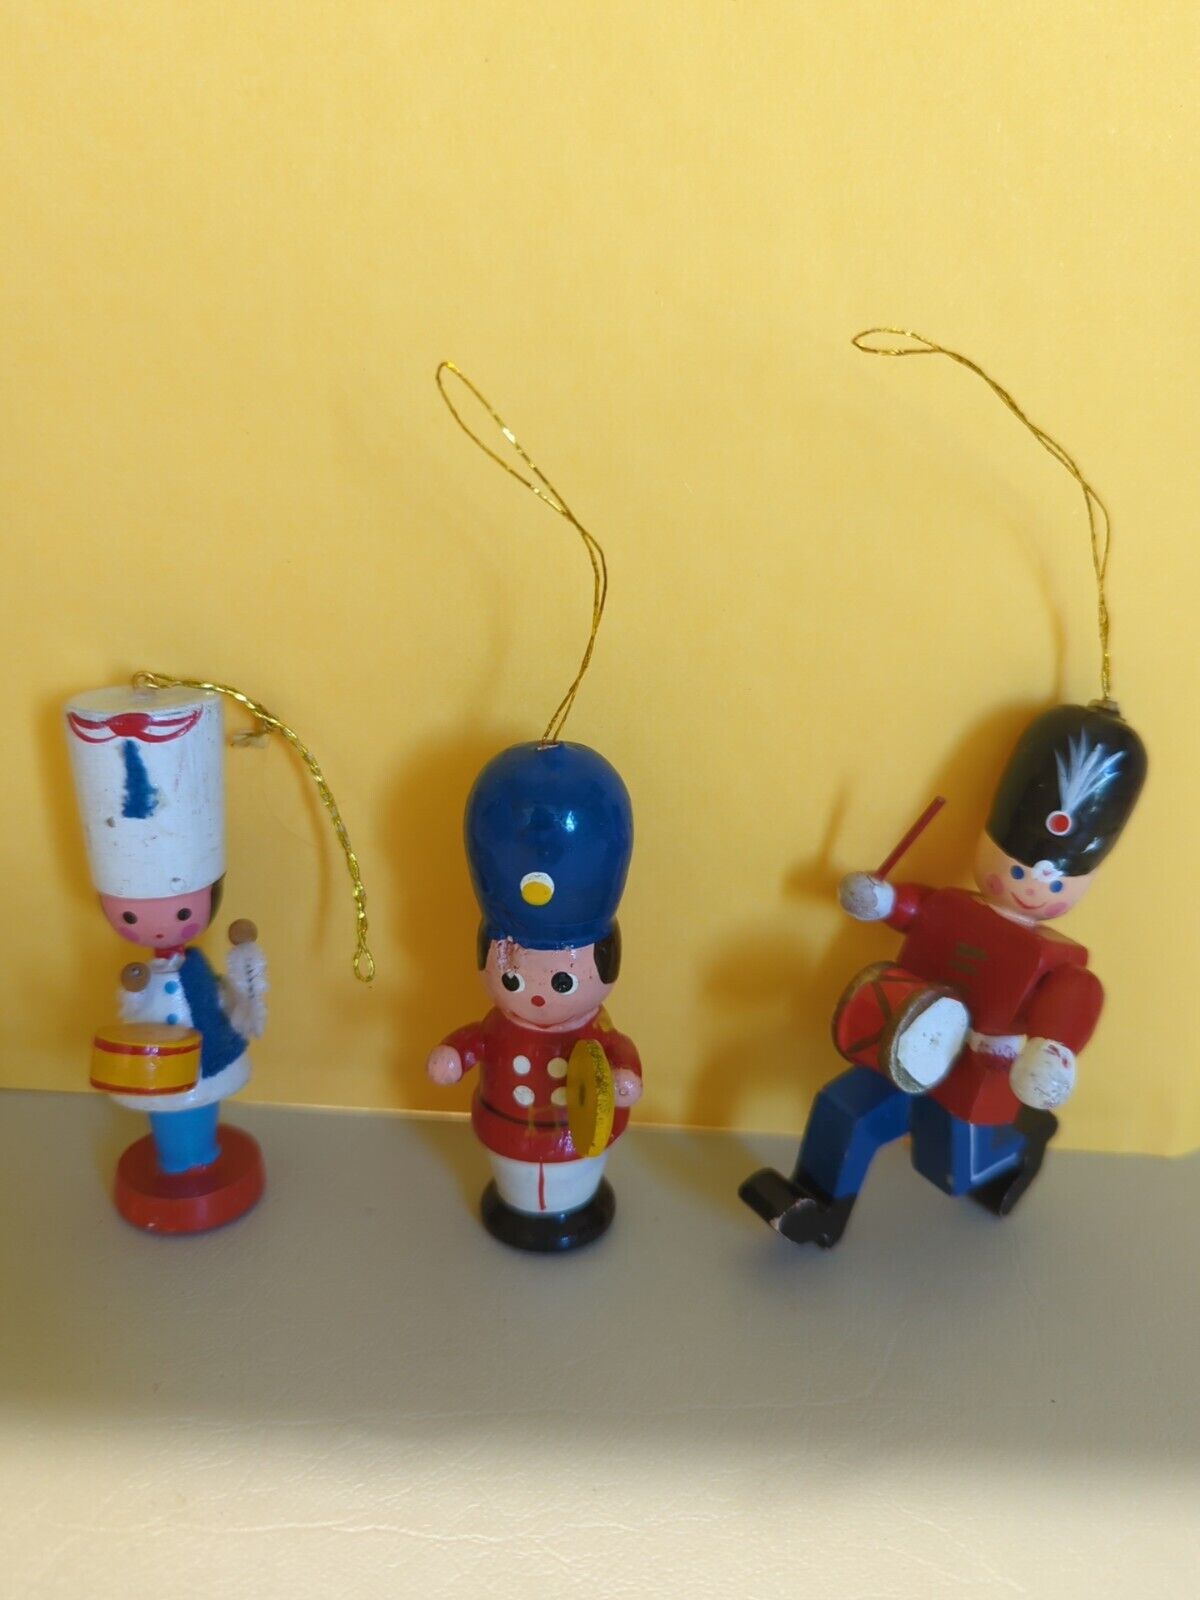 Vintage Wooden Christmas Ornament Lot Soldiers drums Lot of 3 pieces